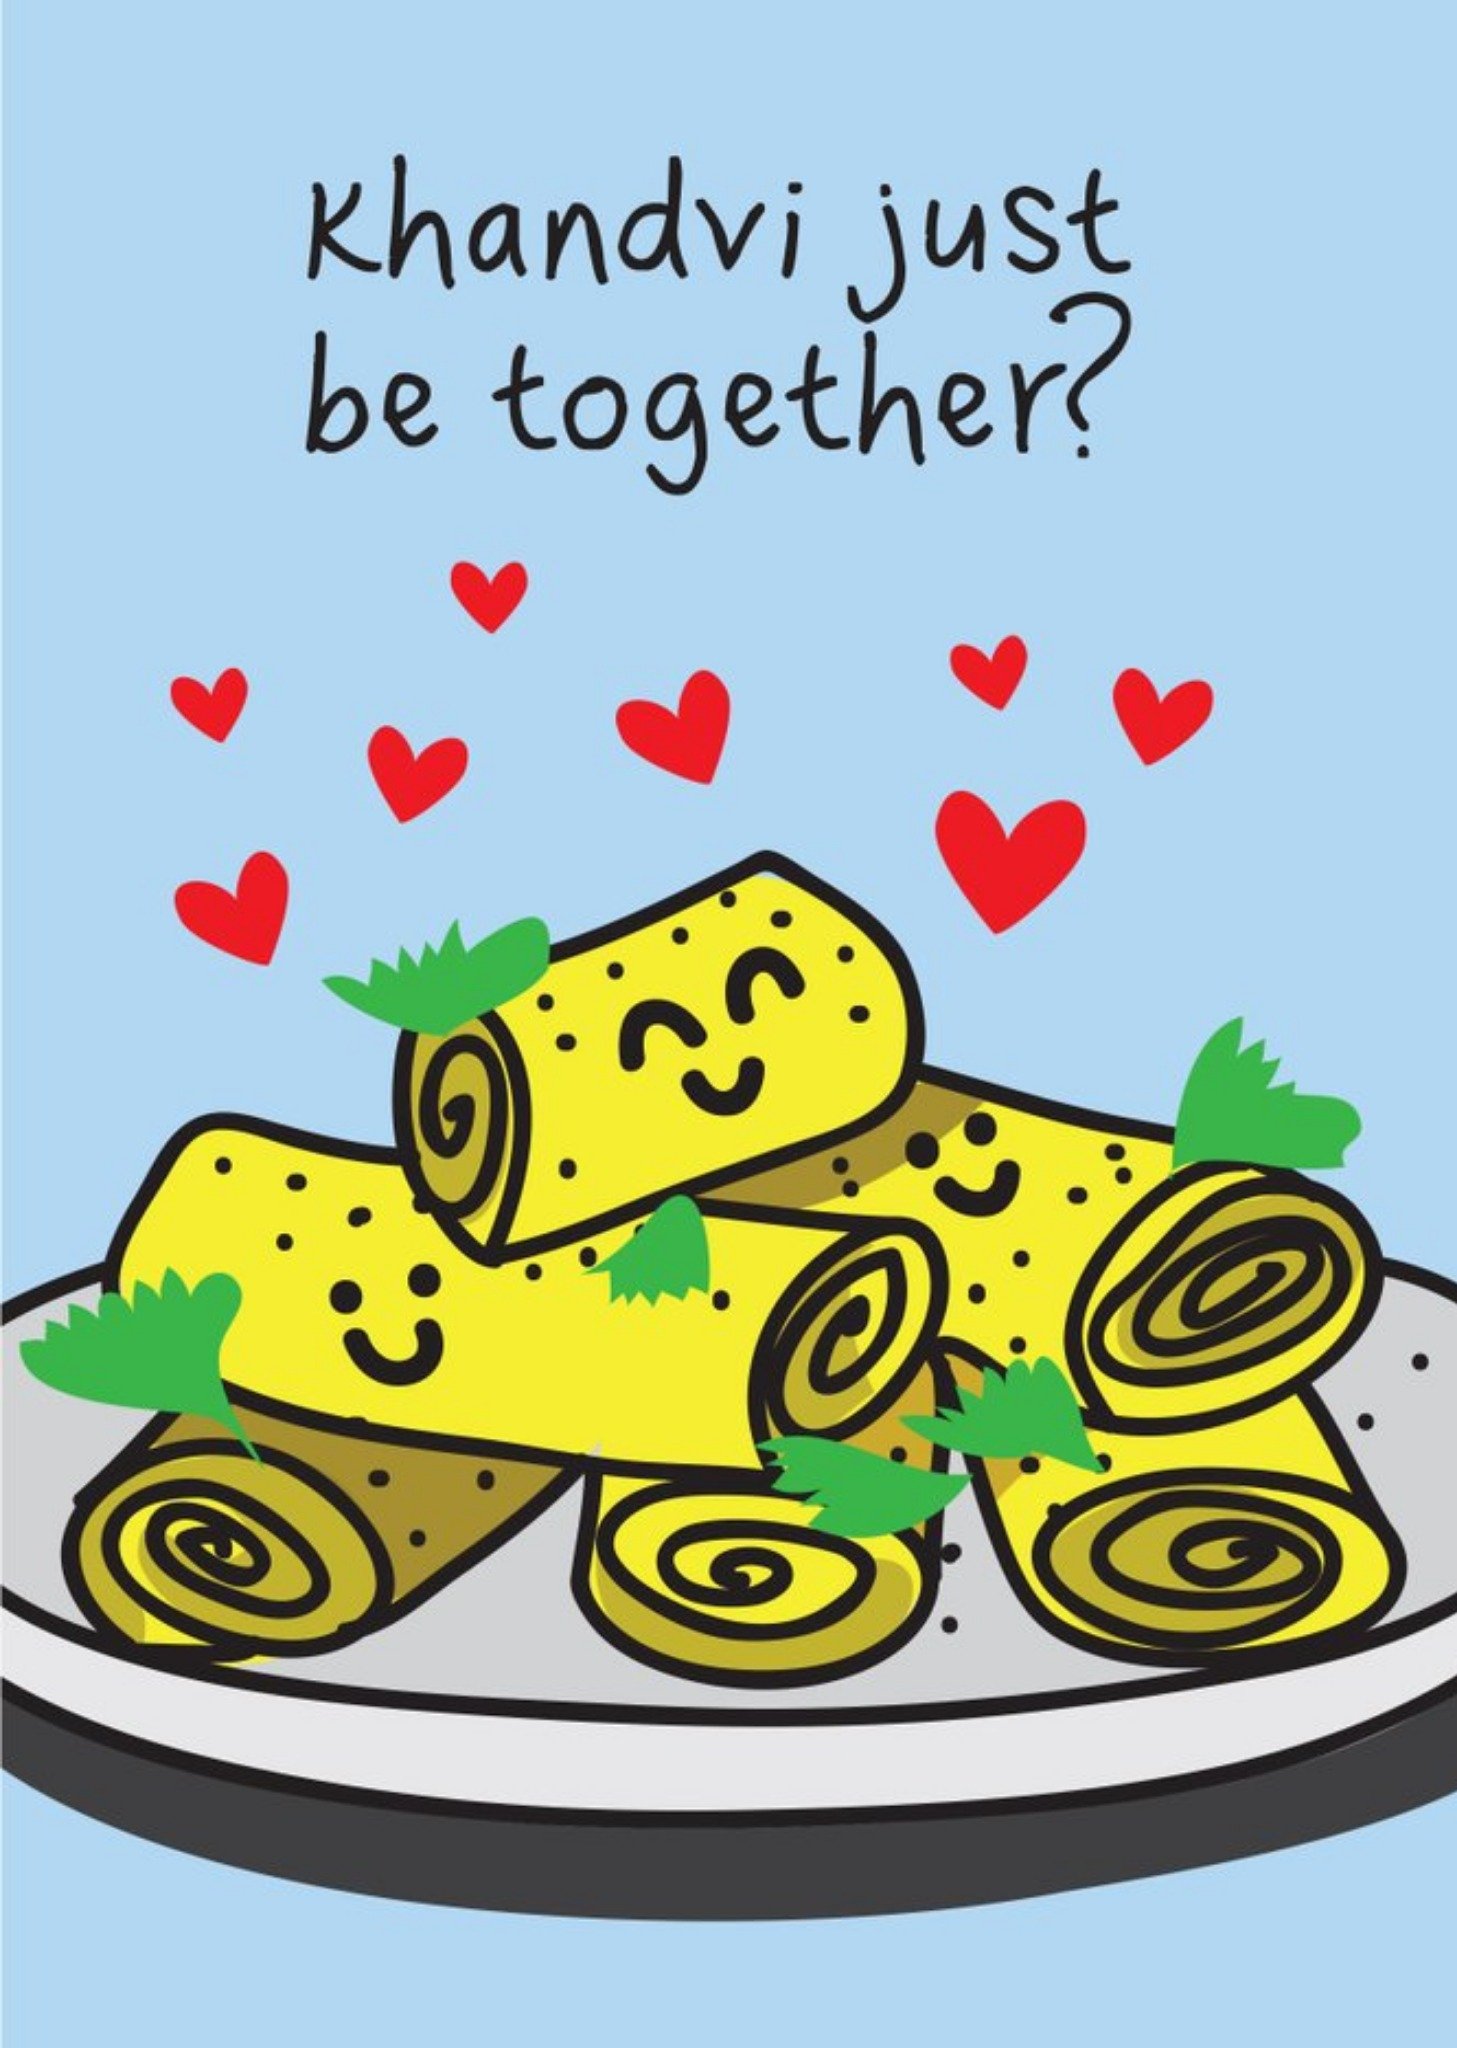 Moonpig The Playful Indian Khandvi Just Be Together Valentines Day Card Ecard